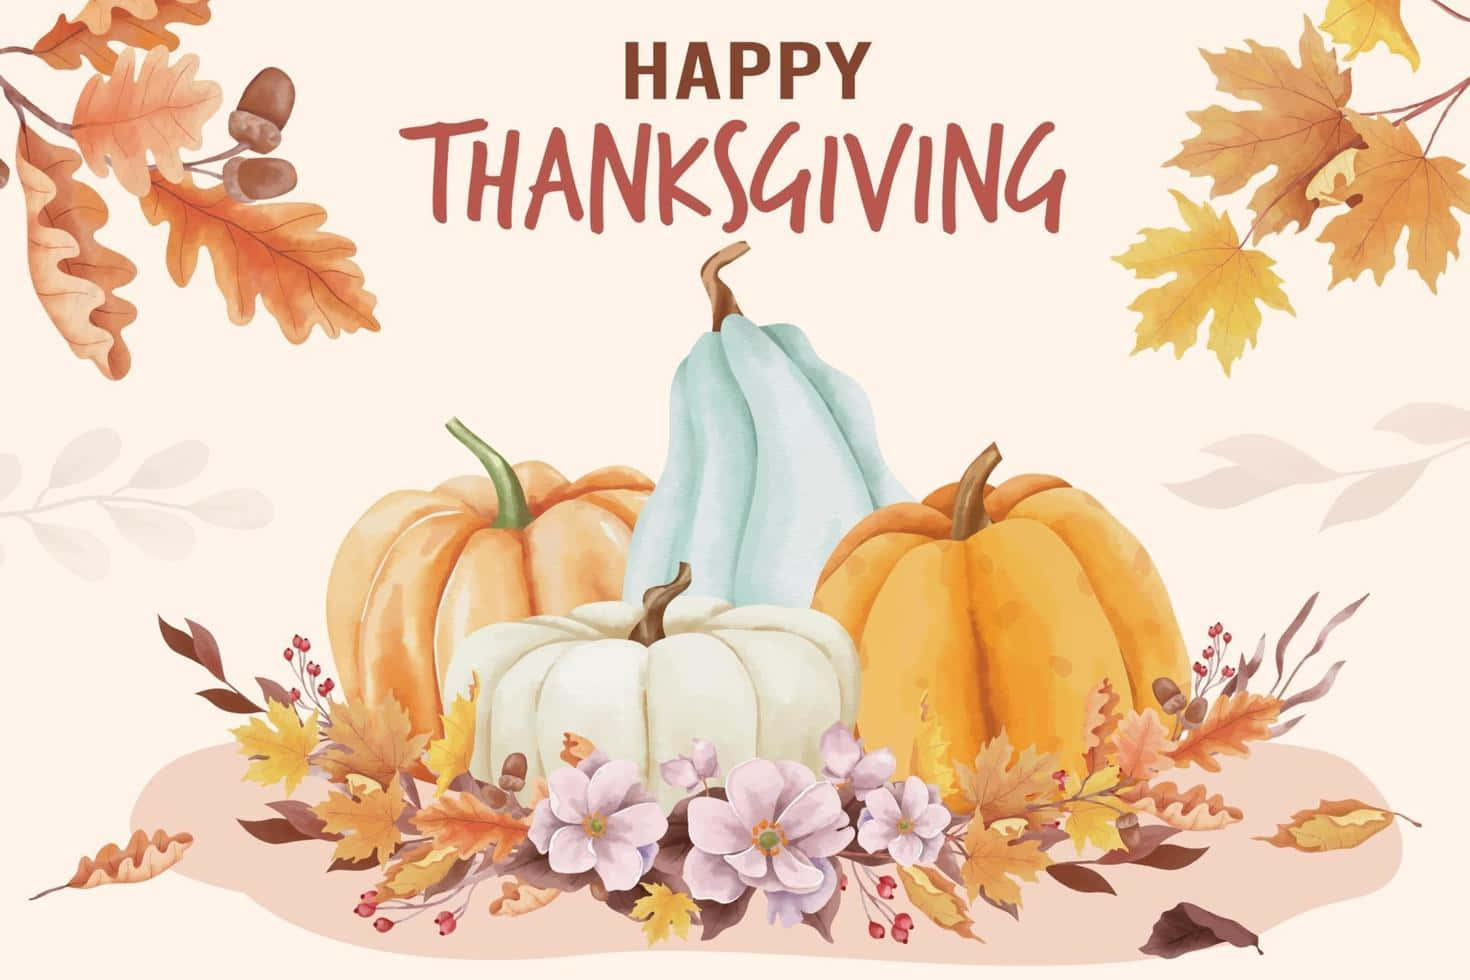 High Resolution Thanksgiving Different Sizes Of Pumpkins Background